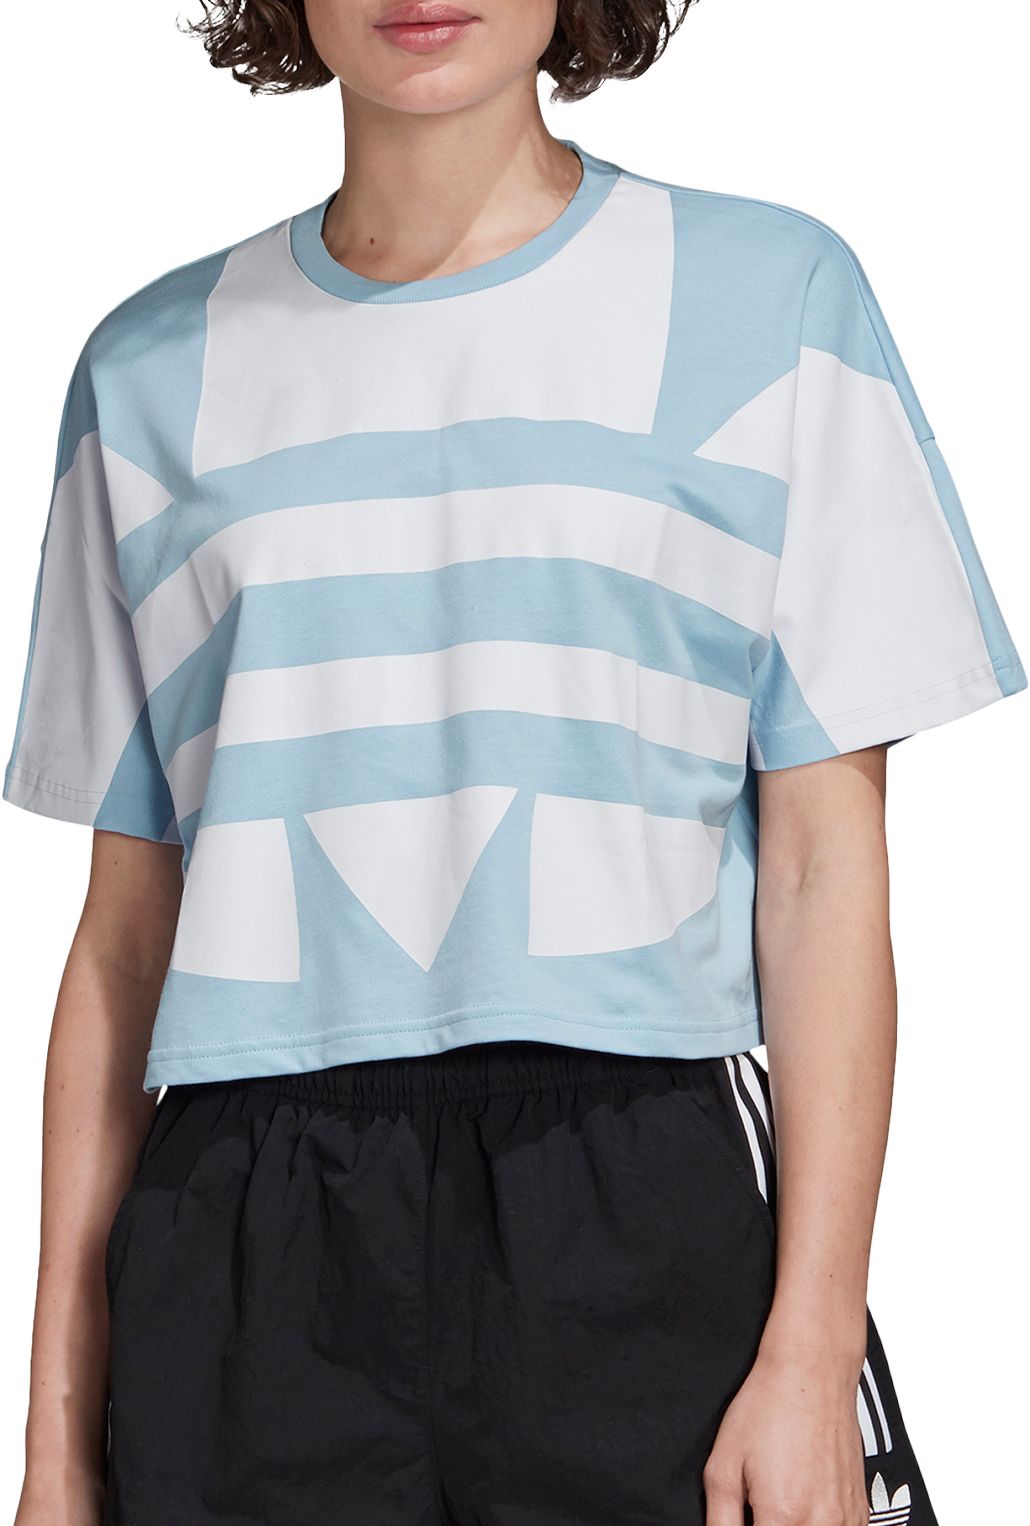 adidas cropped graphic tee